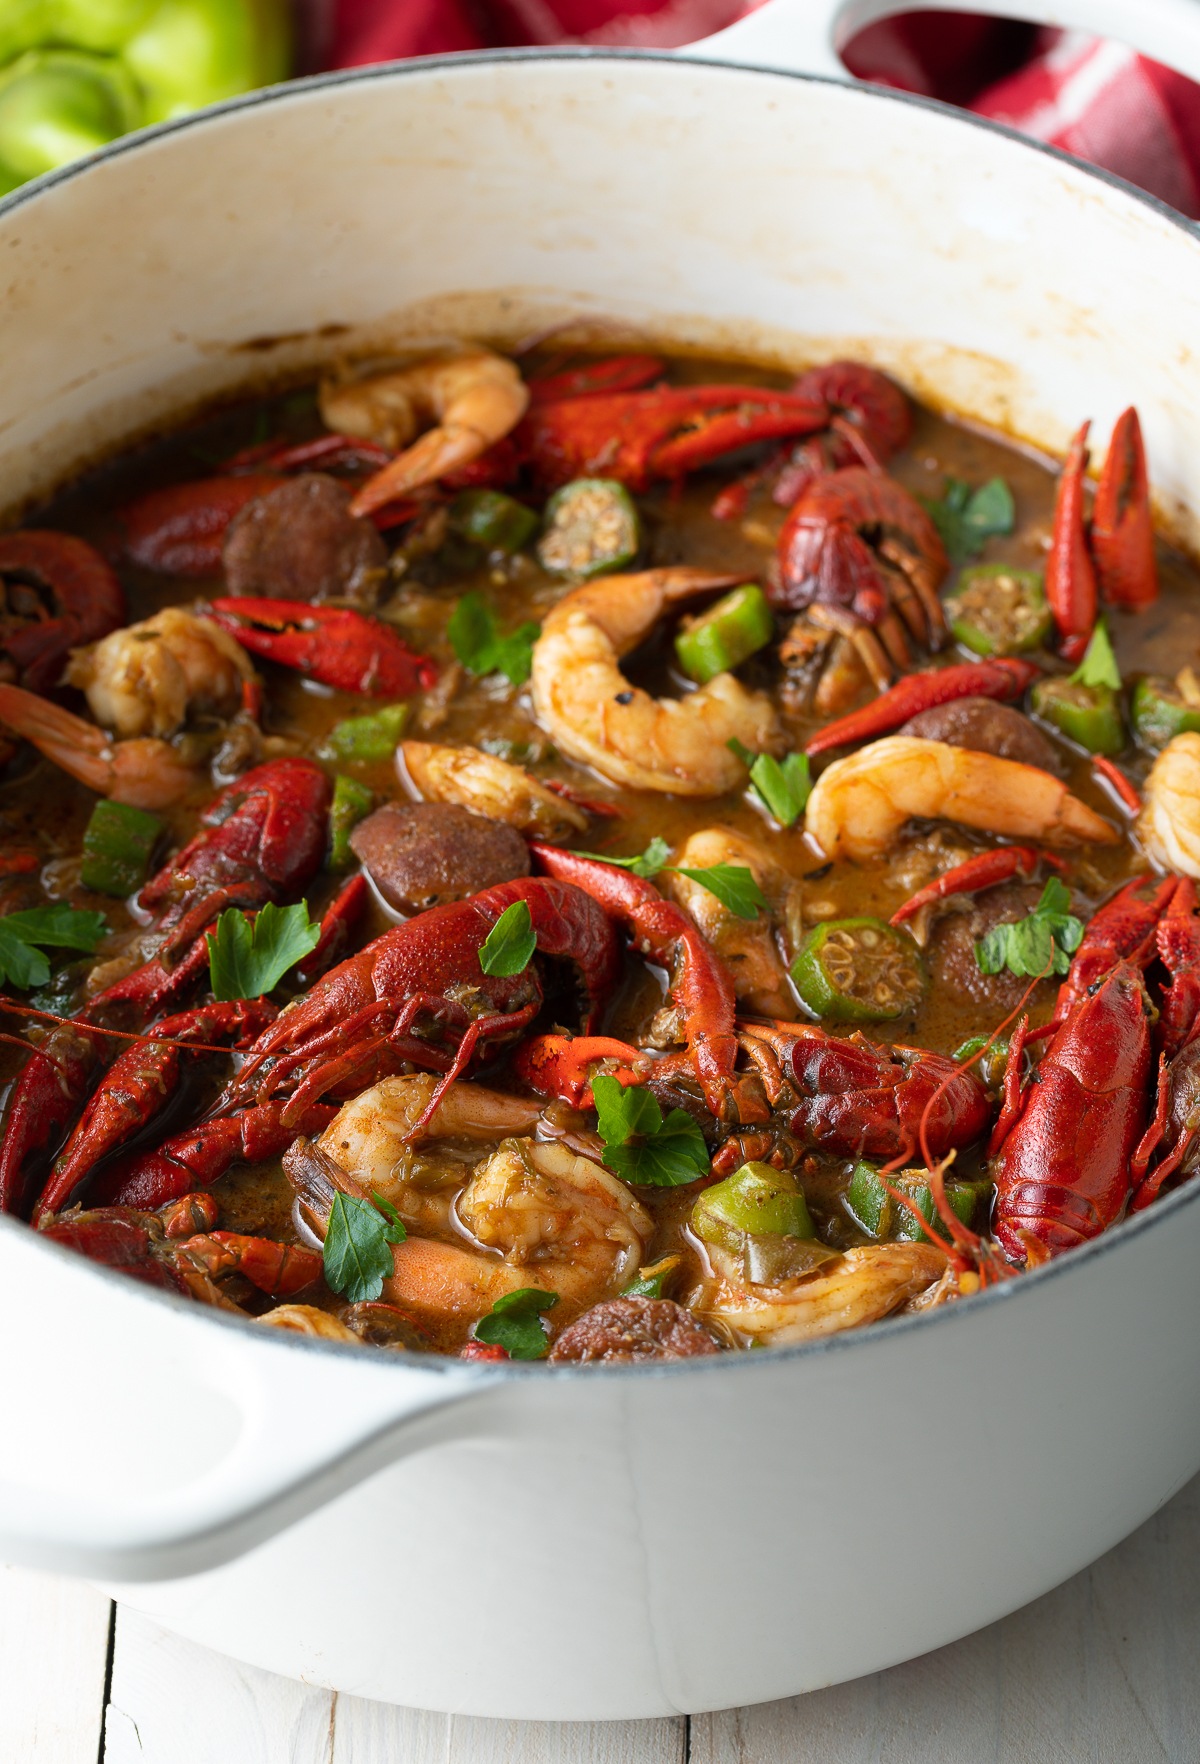 Authentic New Orleans Seafood Gumbo